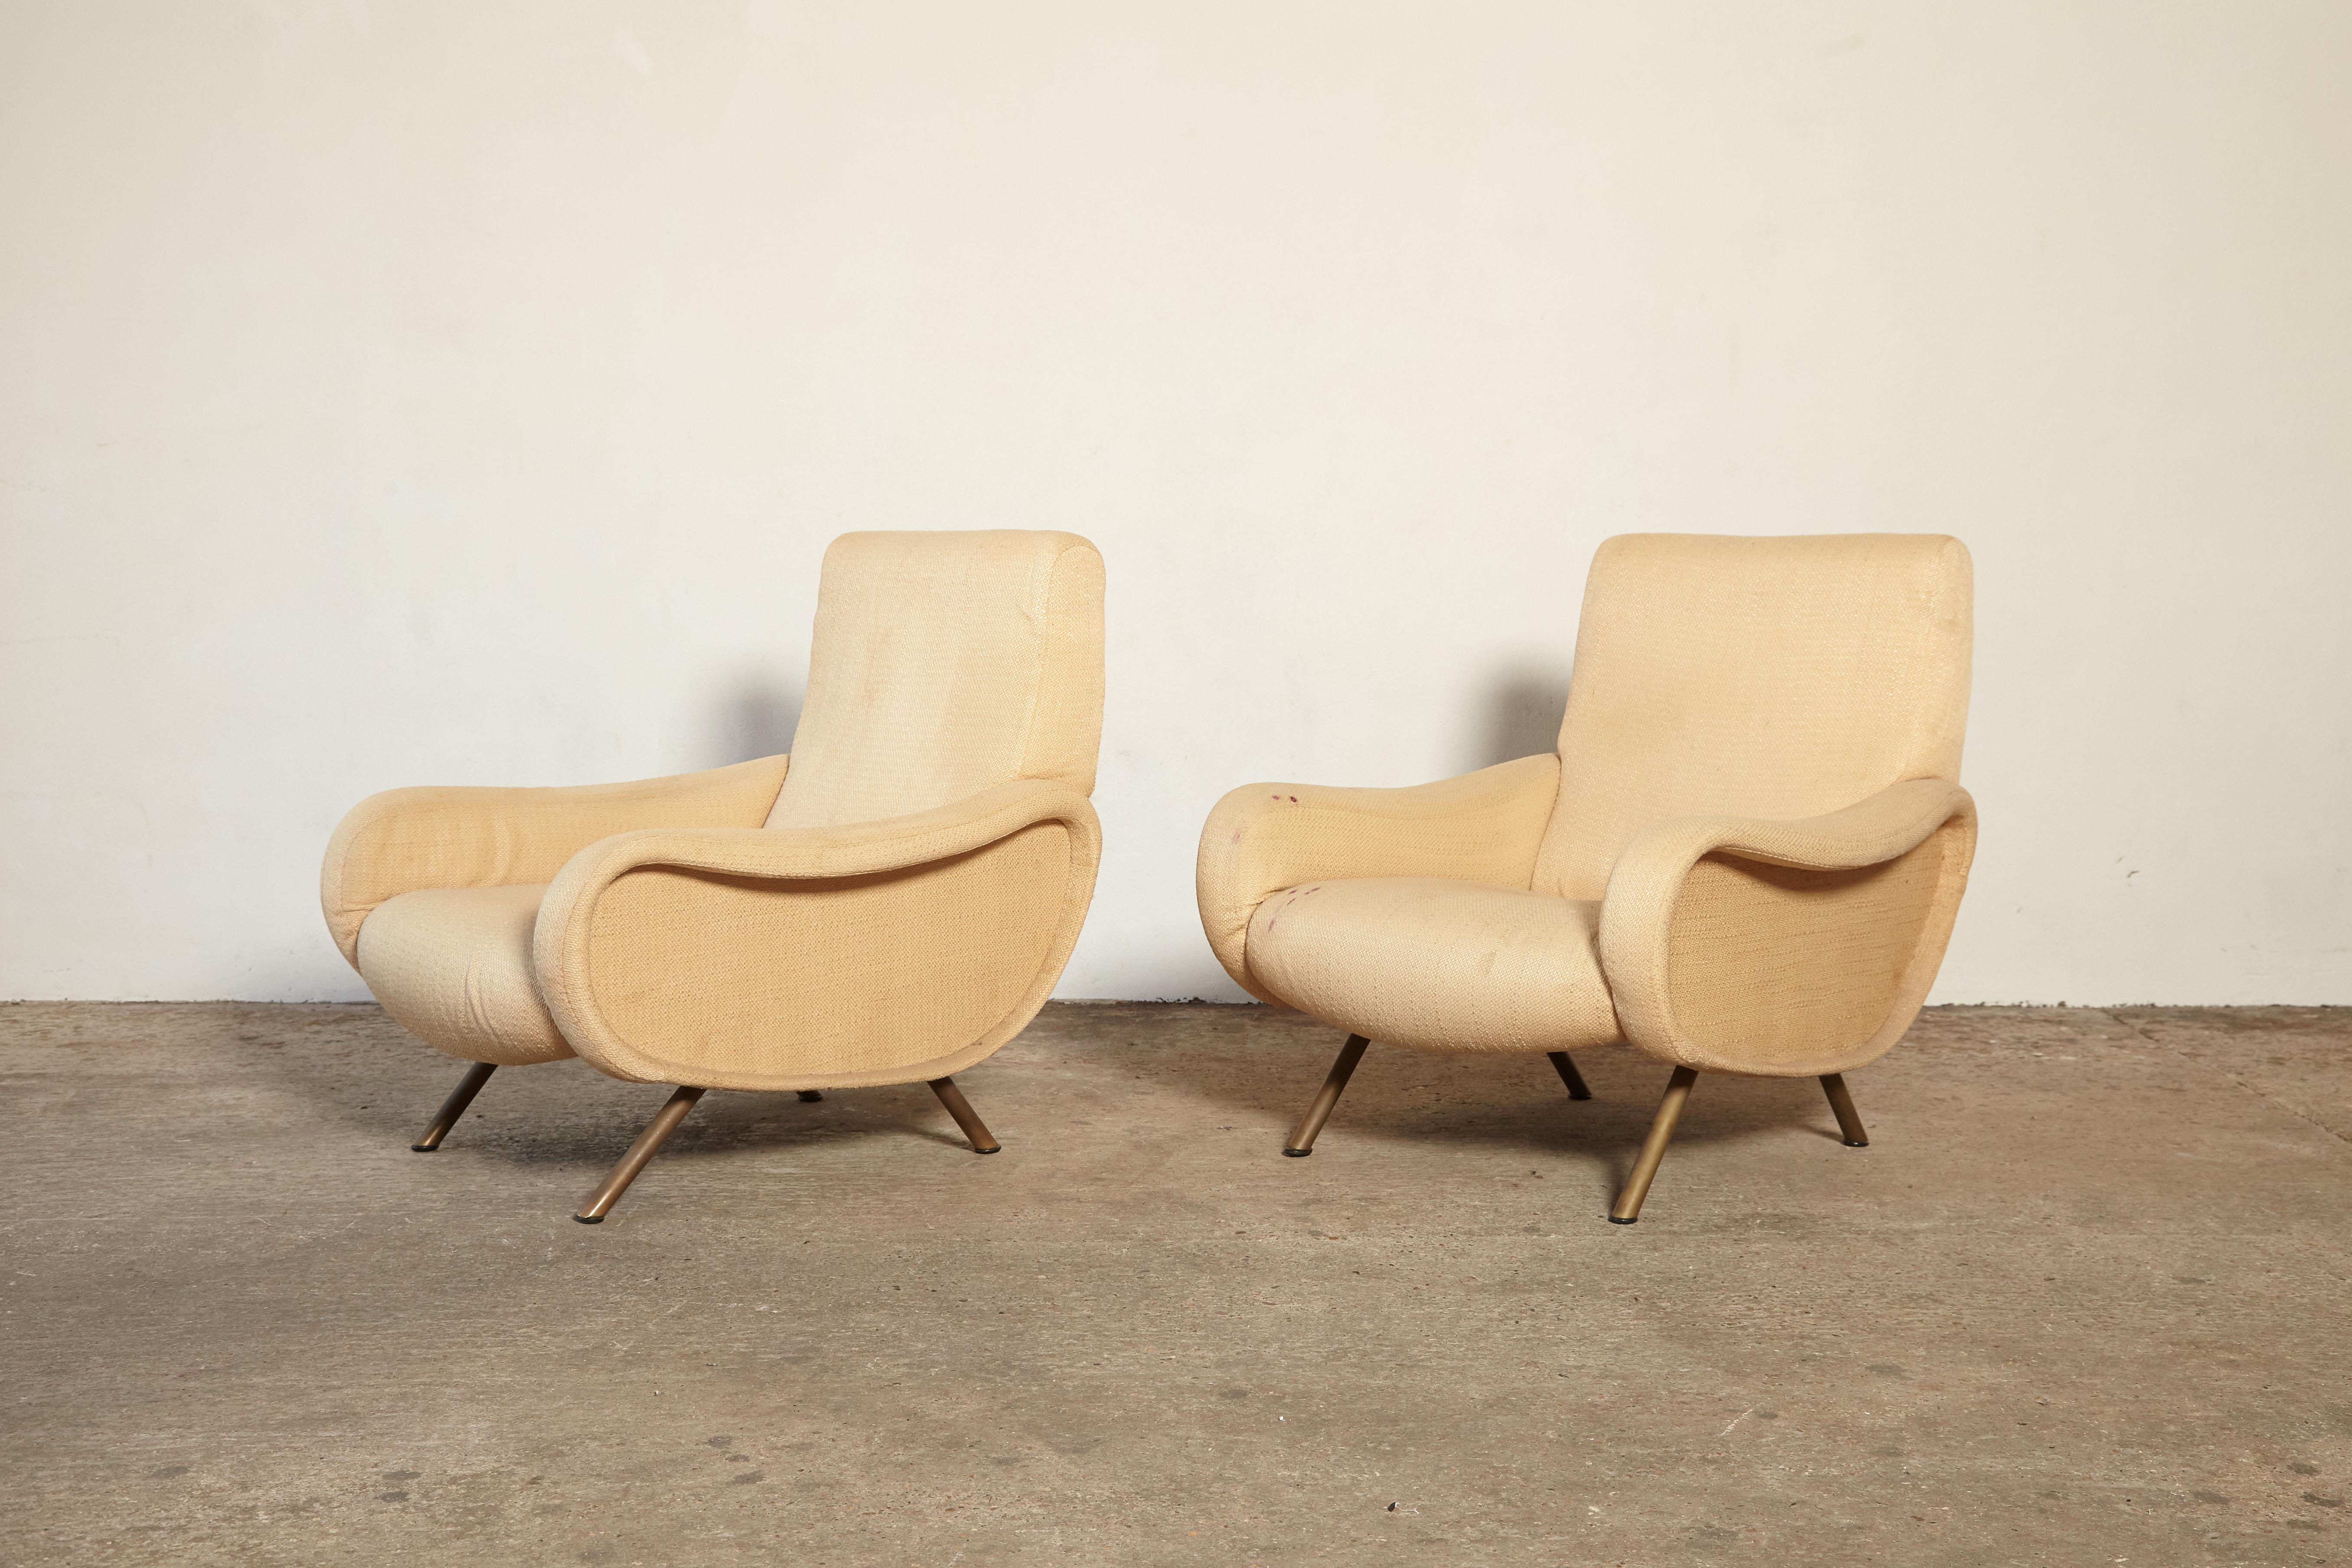 Mid-Century Modern Marco Zanuso Lady Chairs, Arflex, Italy, 1950s, Includes Reupholstery in COM